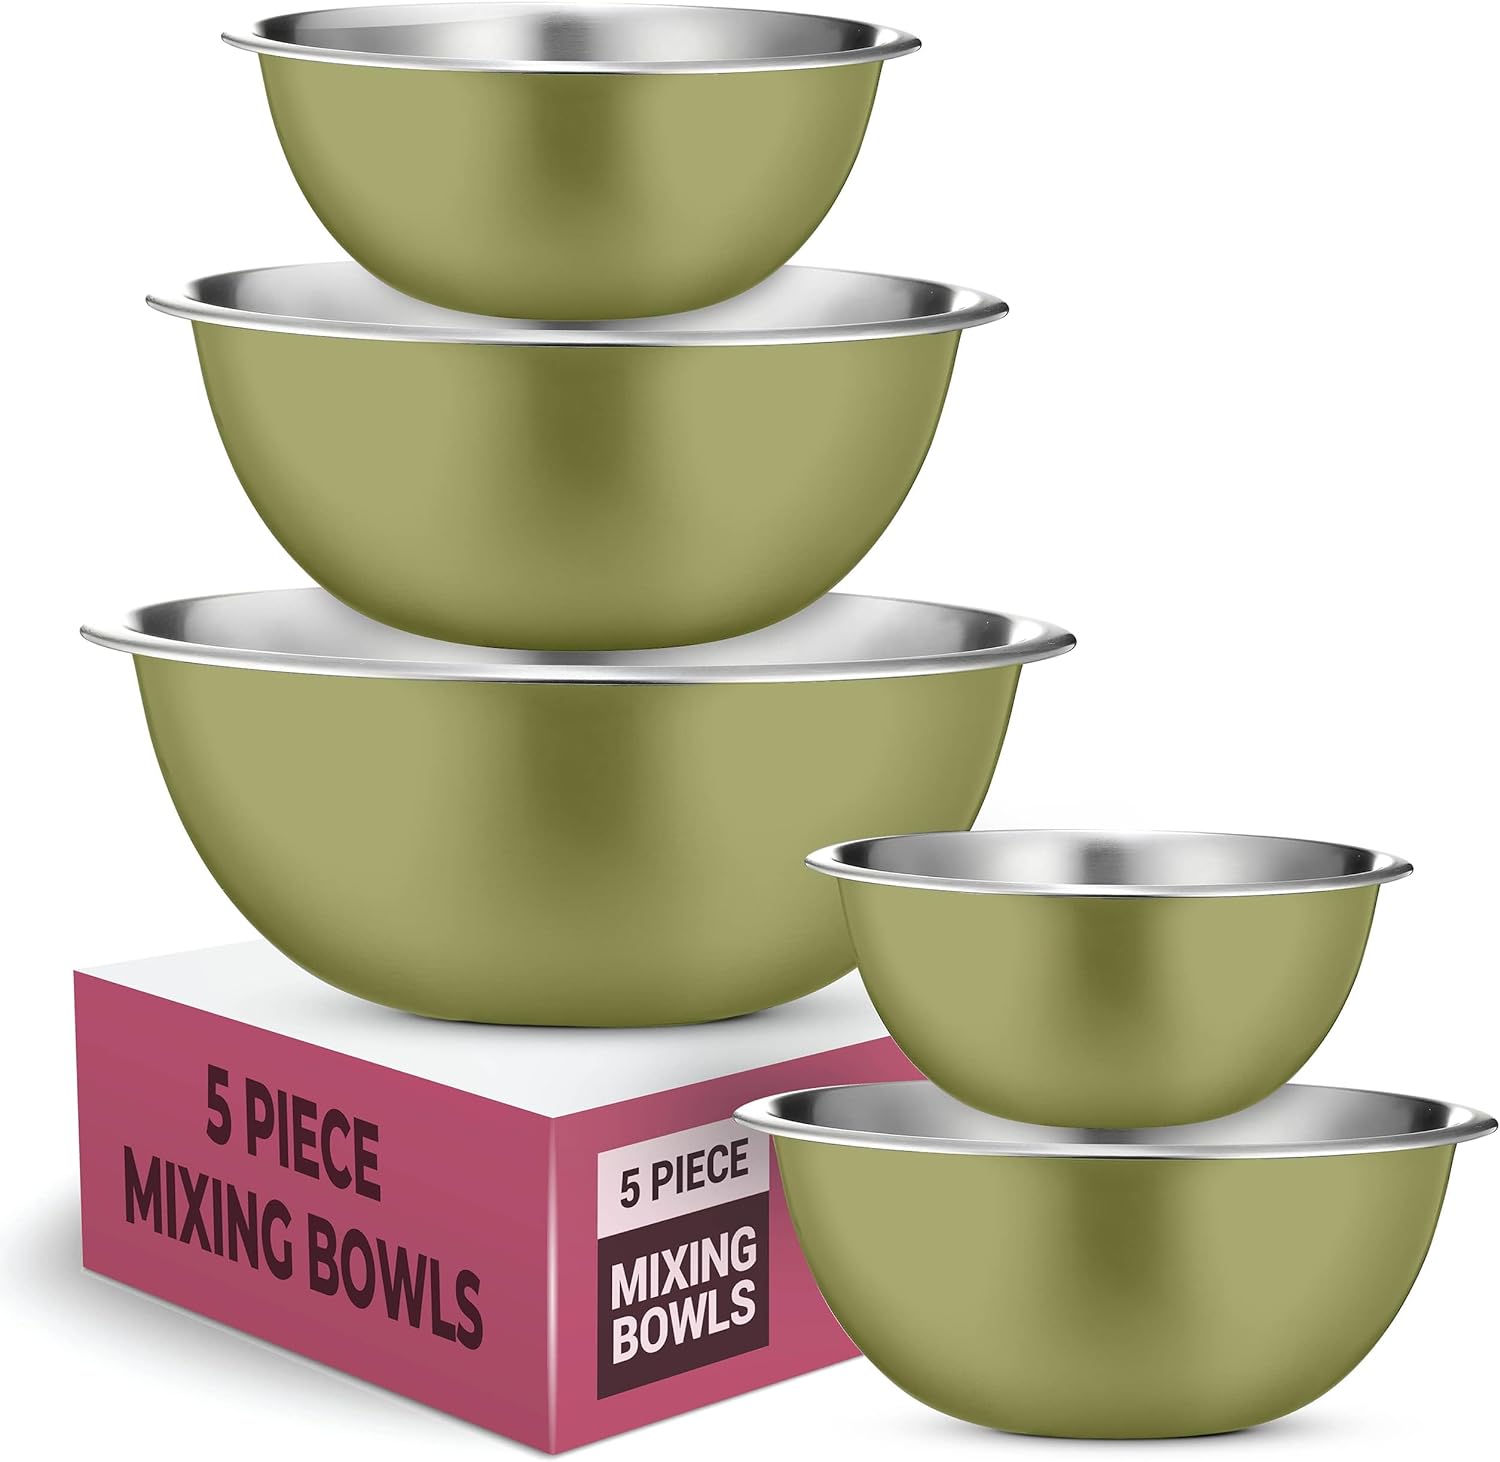 FineDine Stainless Steel Dishware Bowls - Easy To Clean, Nesting Bowls for Space Saving Storage, Great for Cooking, Baking, Prepping, 5 Quarts